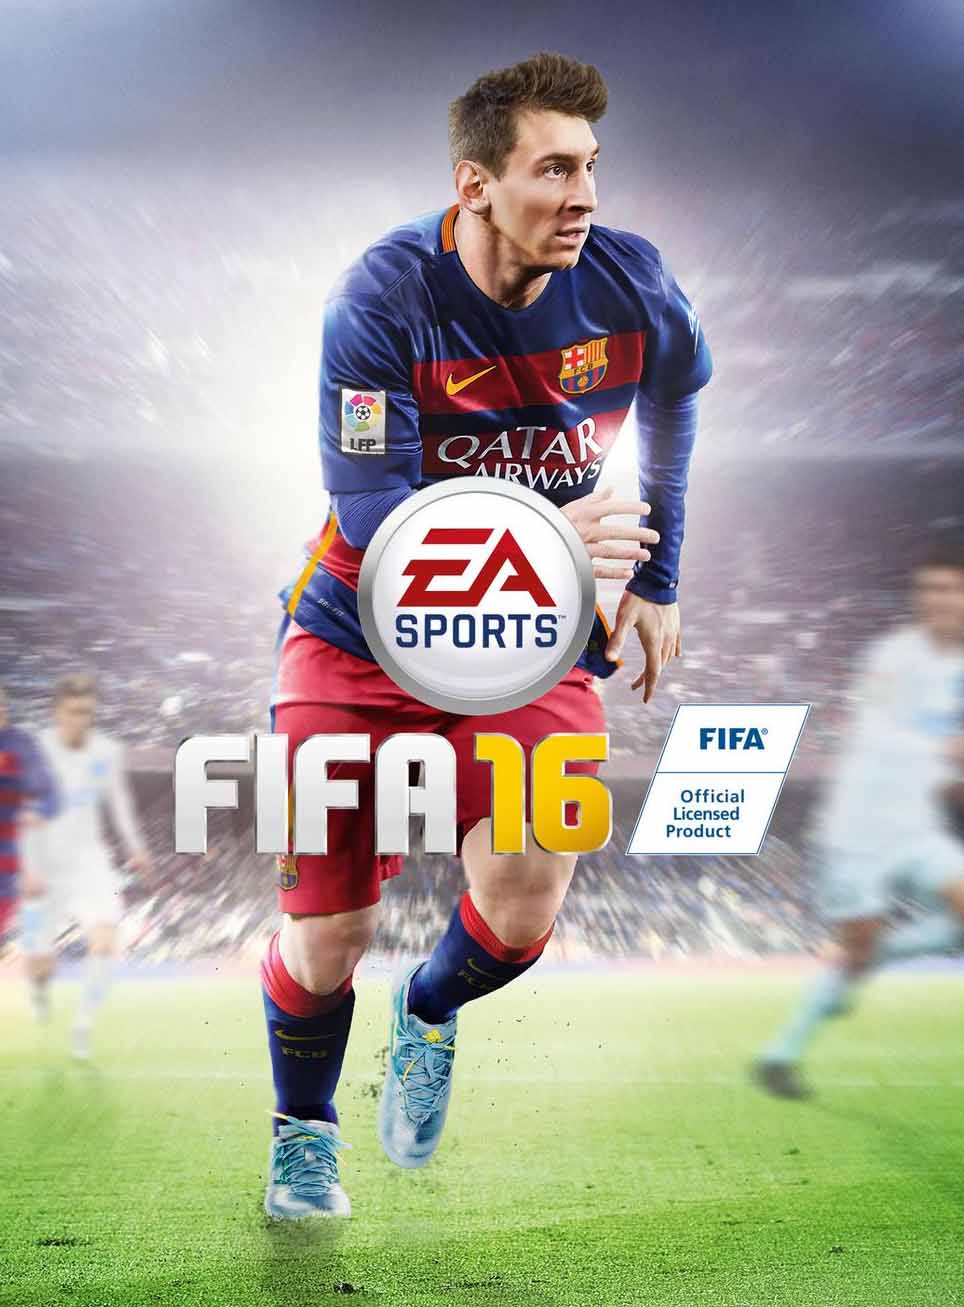 FIFA 16 Cover - All the Official FIFA 16 Covers